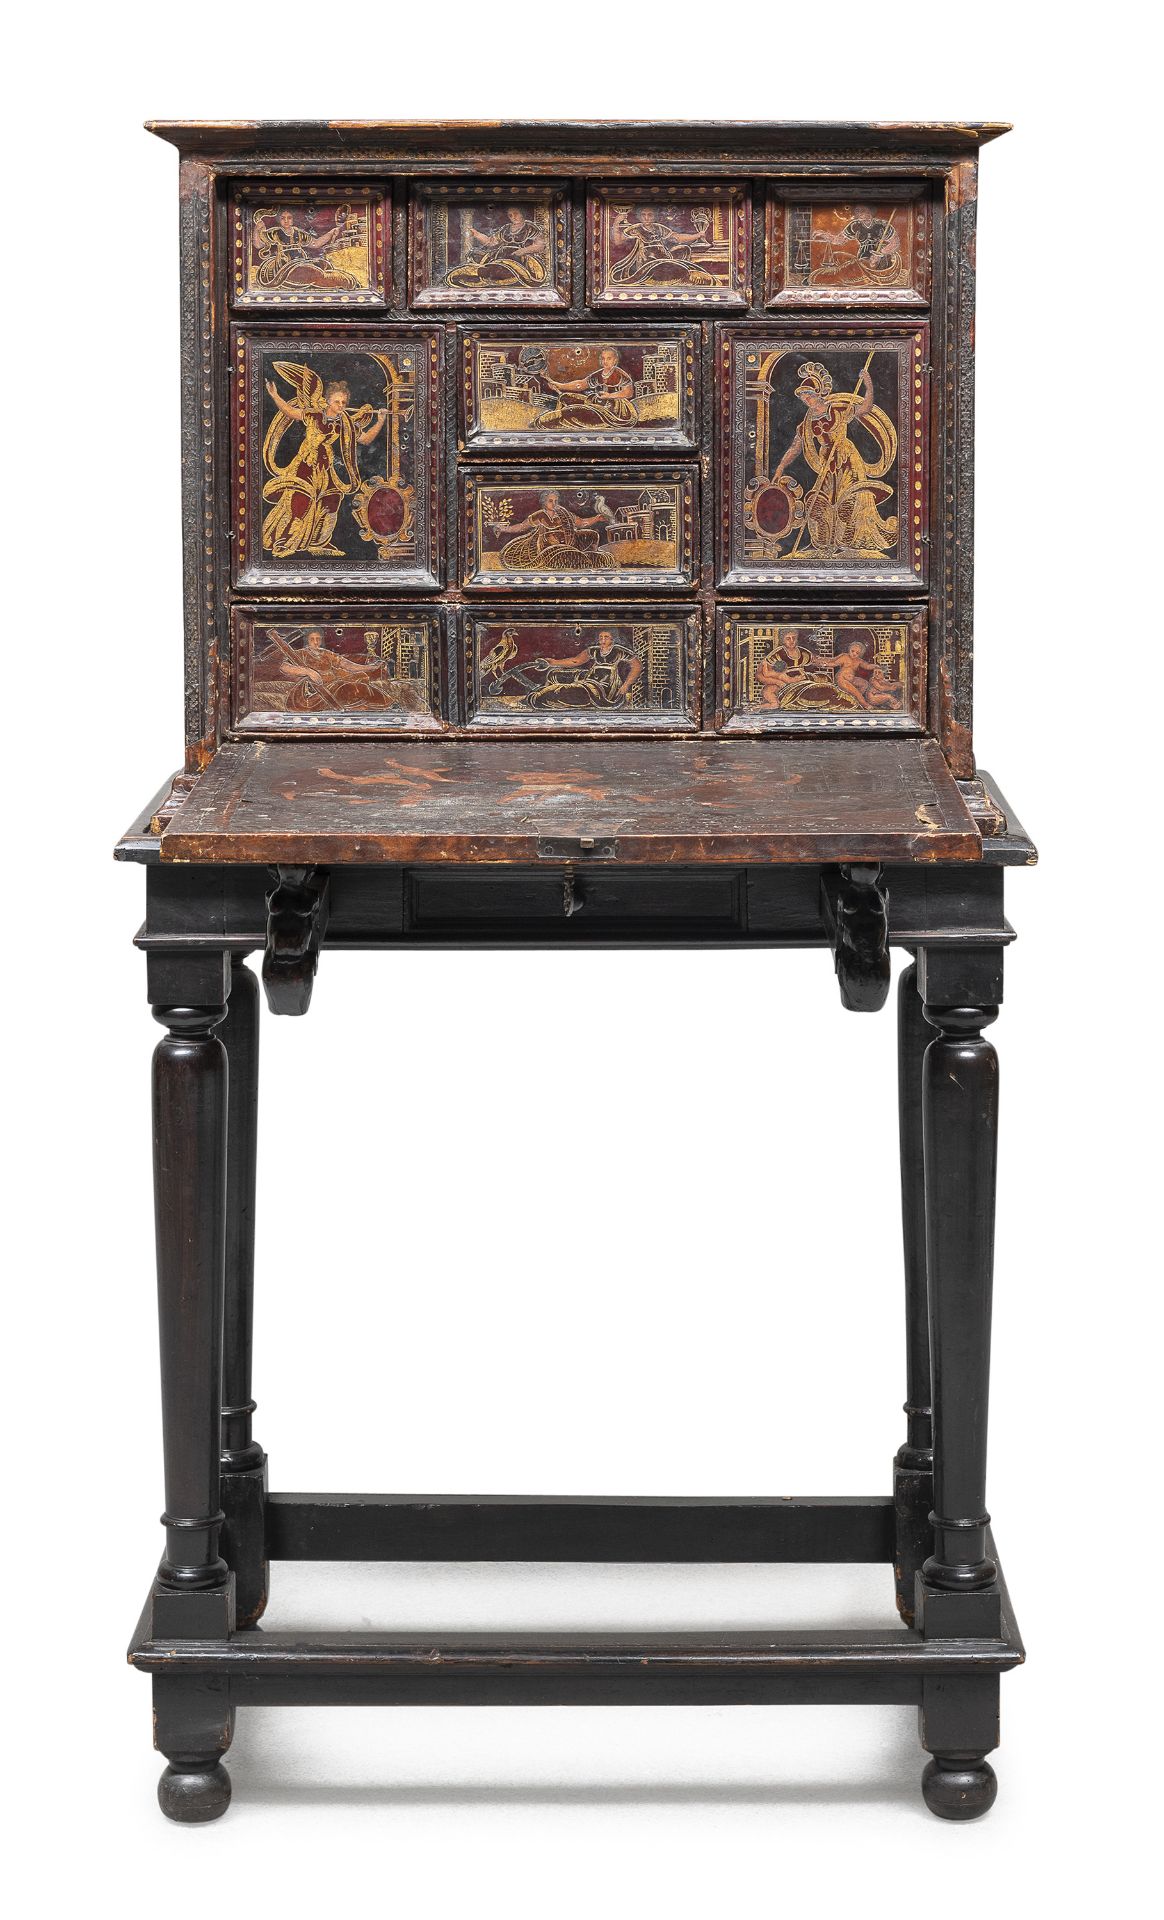 COIN CABINET IN WOOD AND LEATHER PROBABLY SPAIN LATE 16TH CENTURY - Image 2 of 4